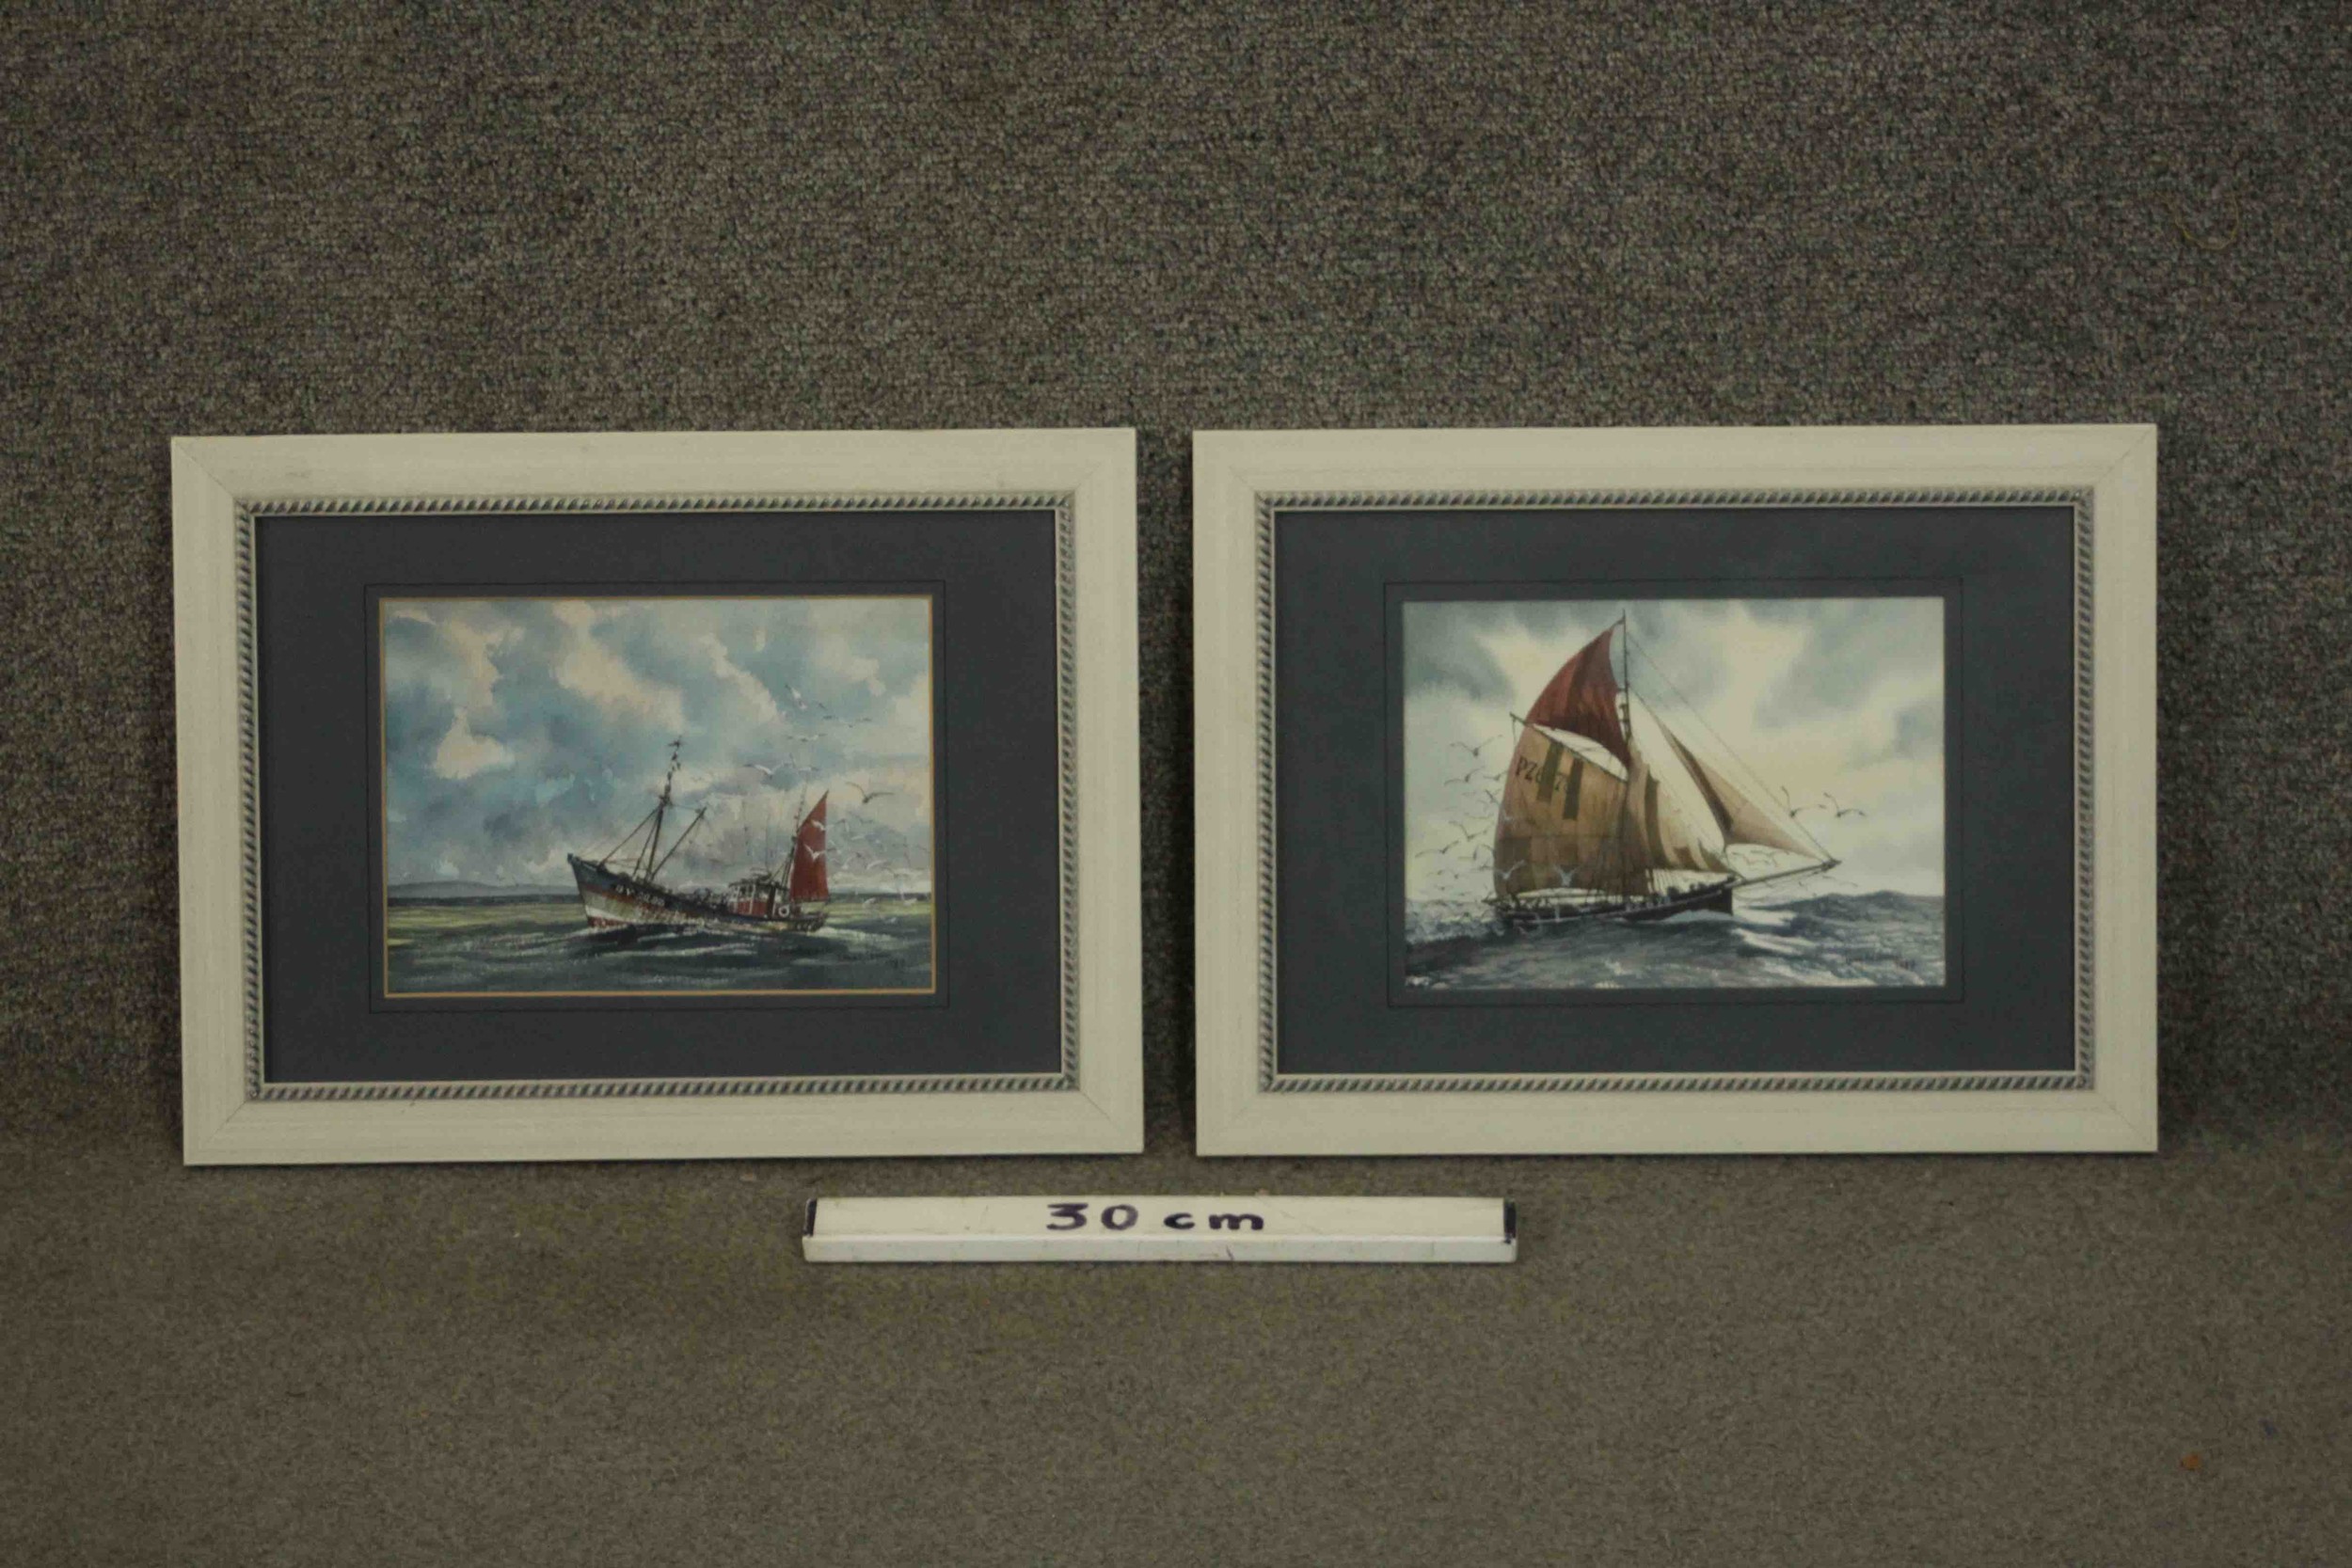 Tony Warren (1930-1994), two studies of sailing ships, watercolours, signed and dated 1987 lower - Image 2 of 8